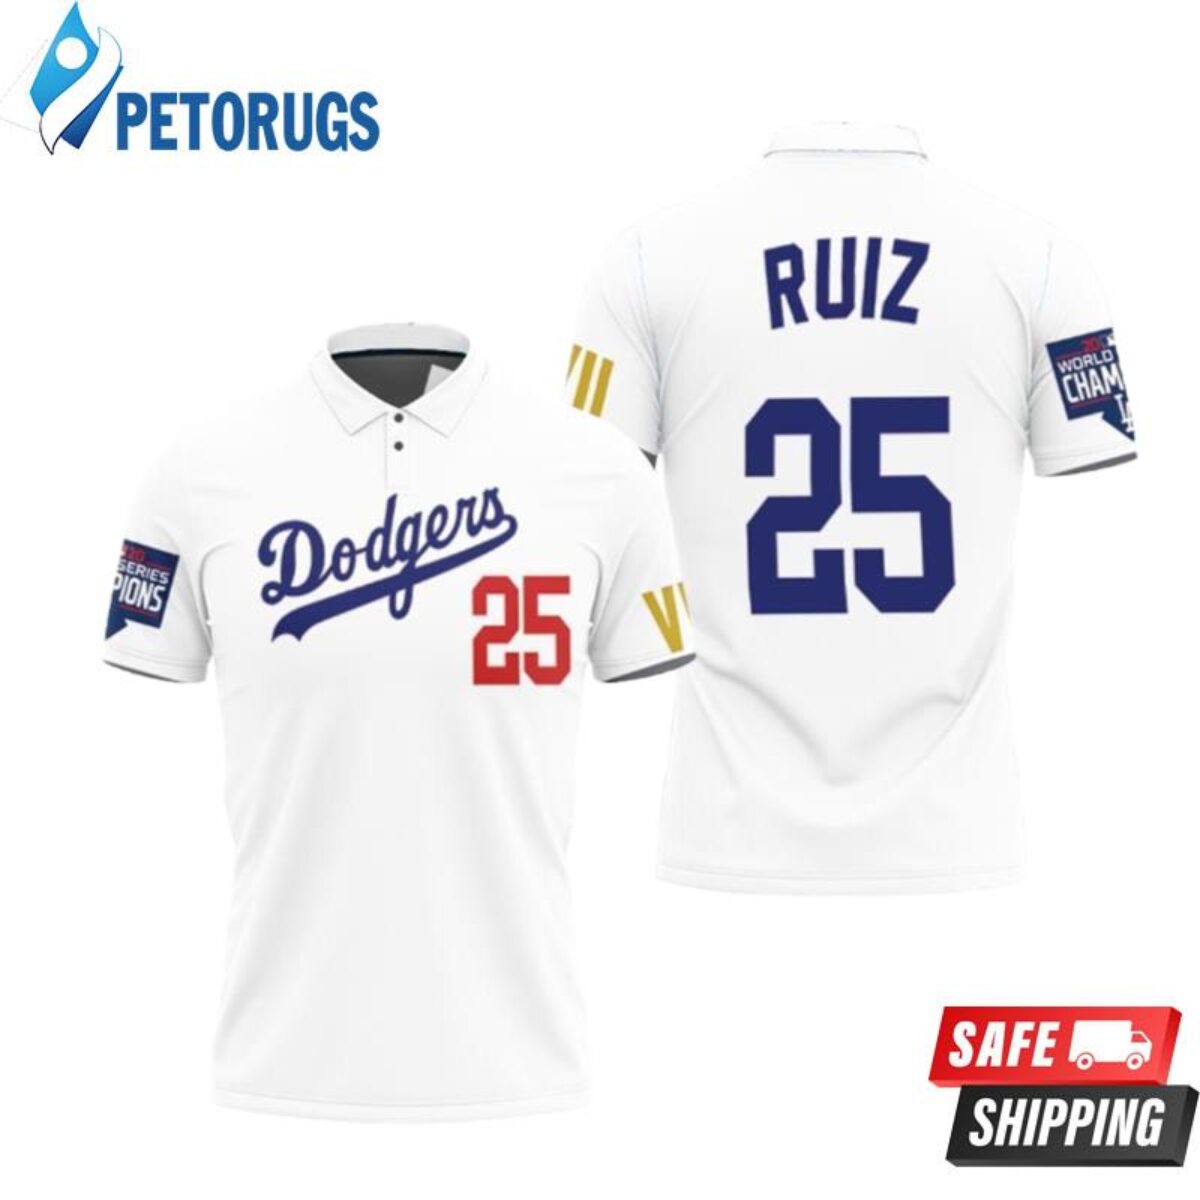 Majestic Los Angeles Dodgers Blank 2020 Mlb Player Black Inspired Style  Polo Shirts - Peto Rugs